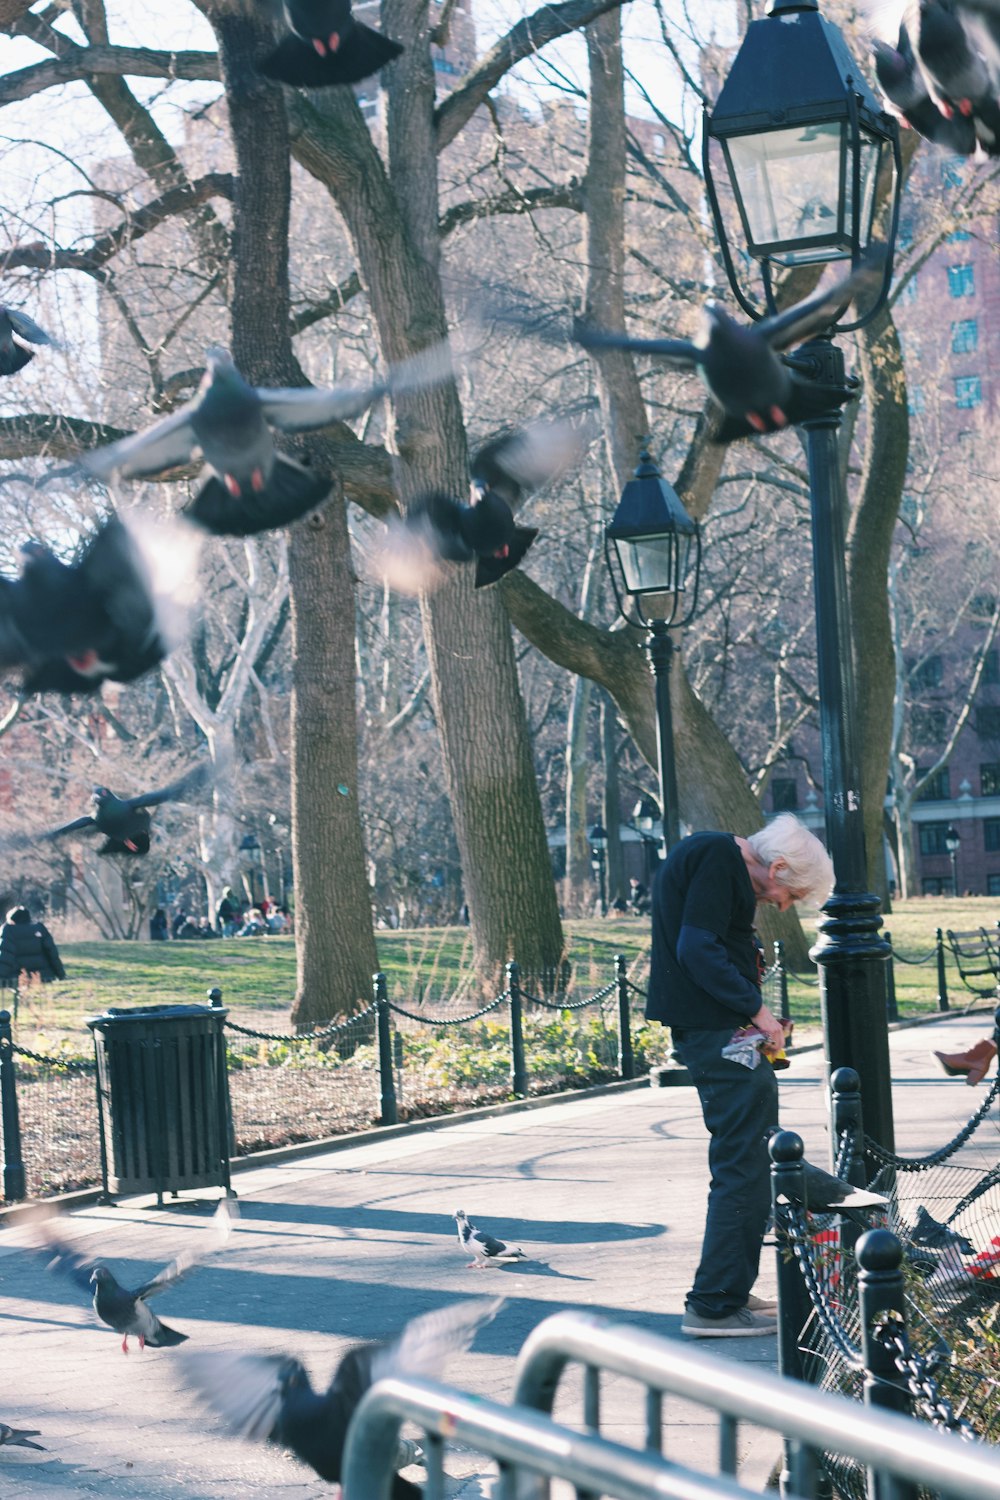 a man is feeding pigeons in a park